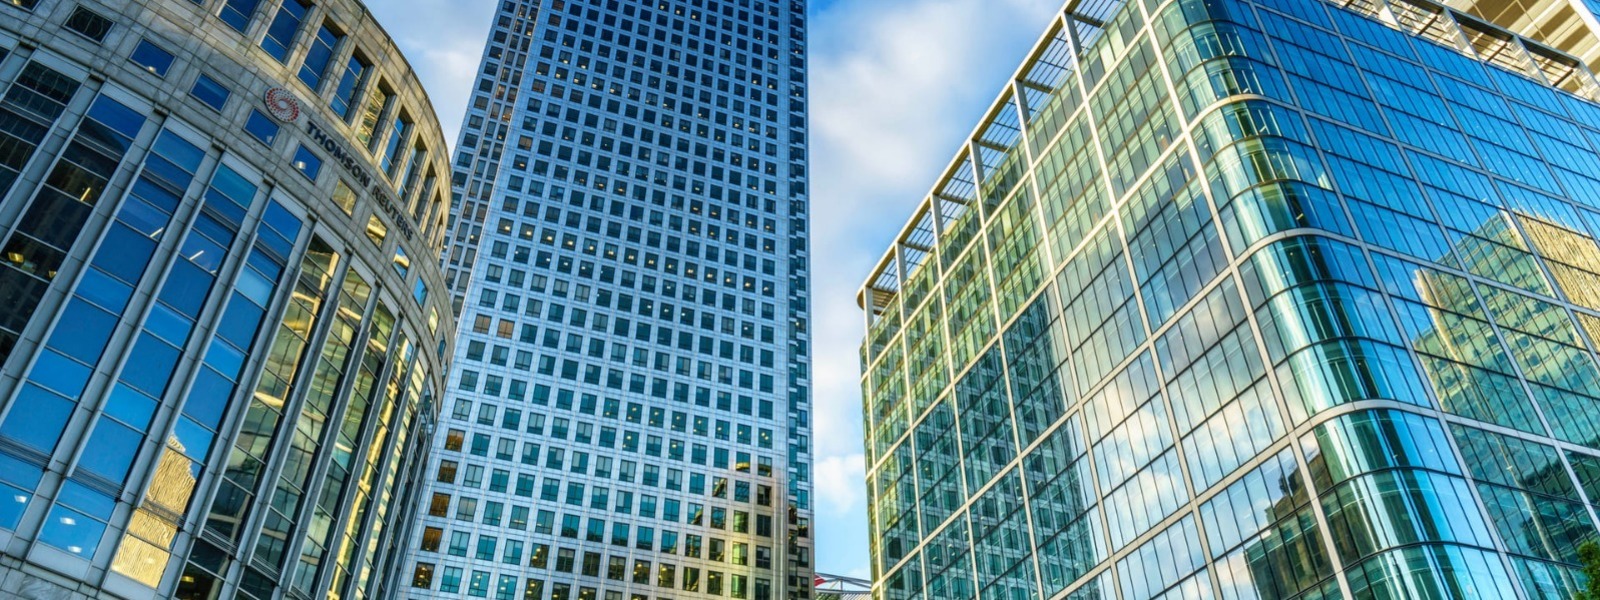 Office buildings in Canary Wharf financial services district in London